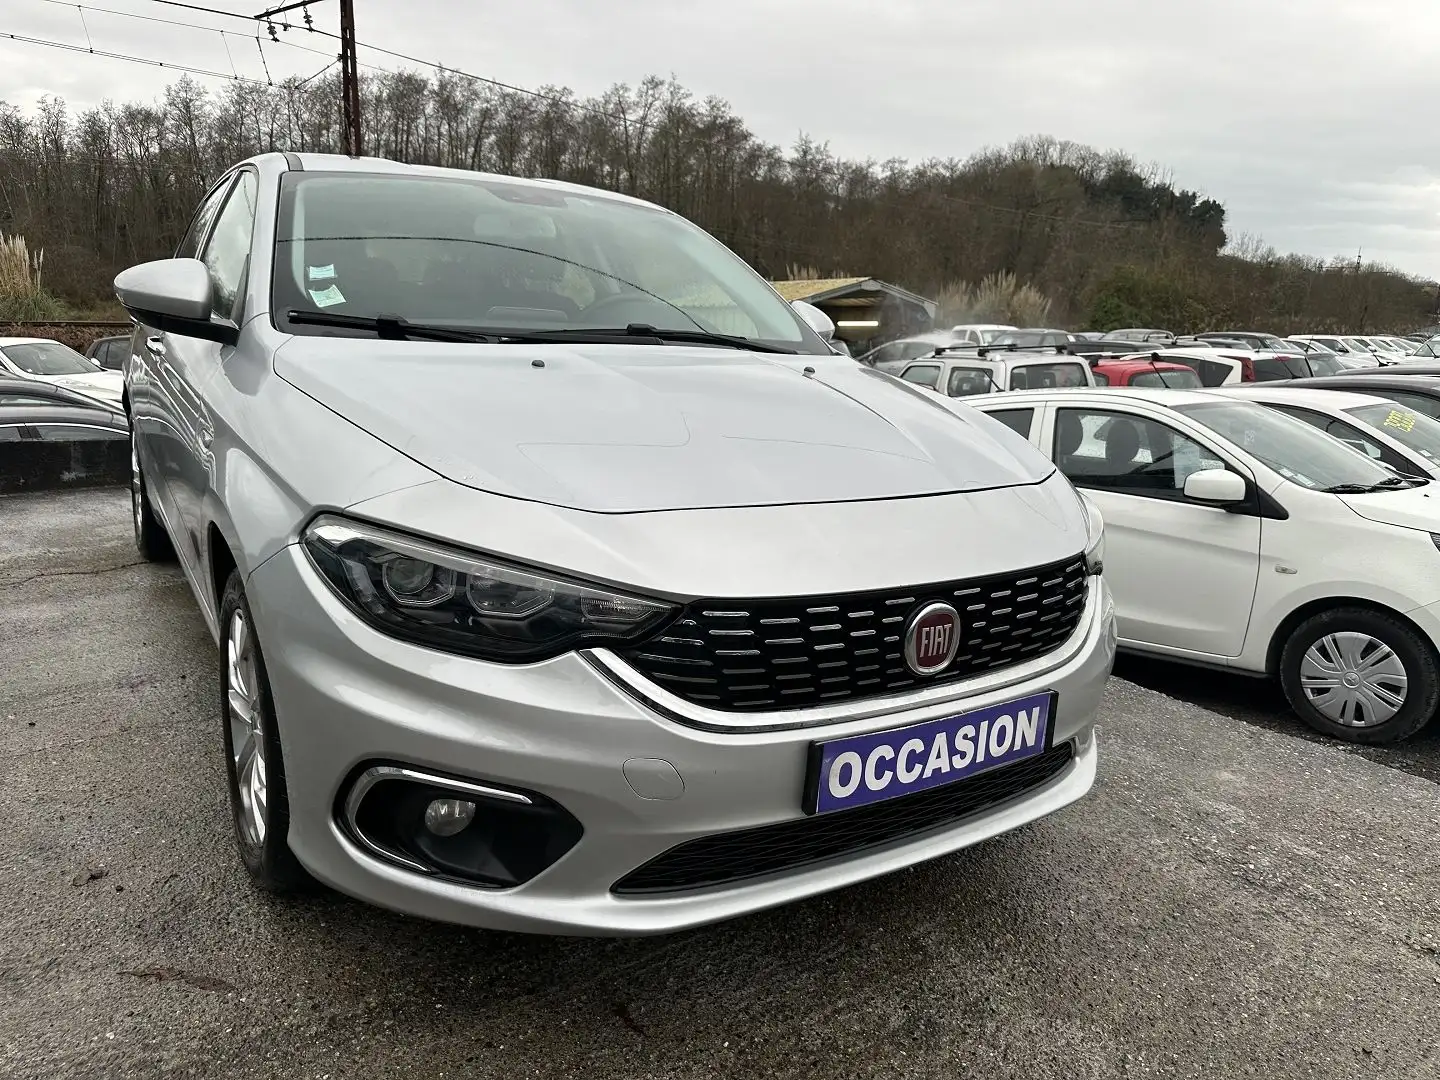 Fiat Tipo 1.6 MULTIJET 120CH EASY S/S DCT 5P - 1